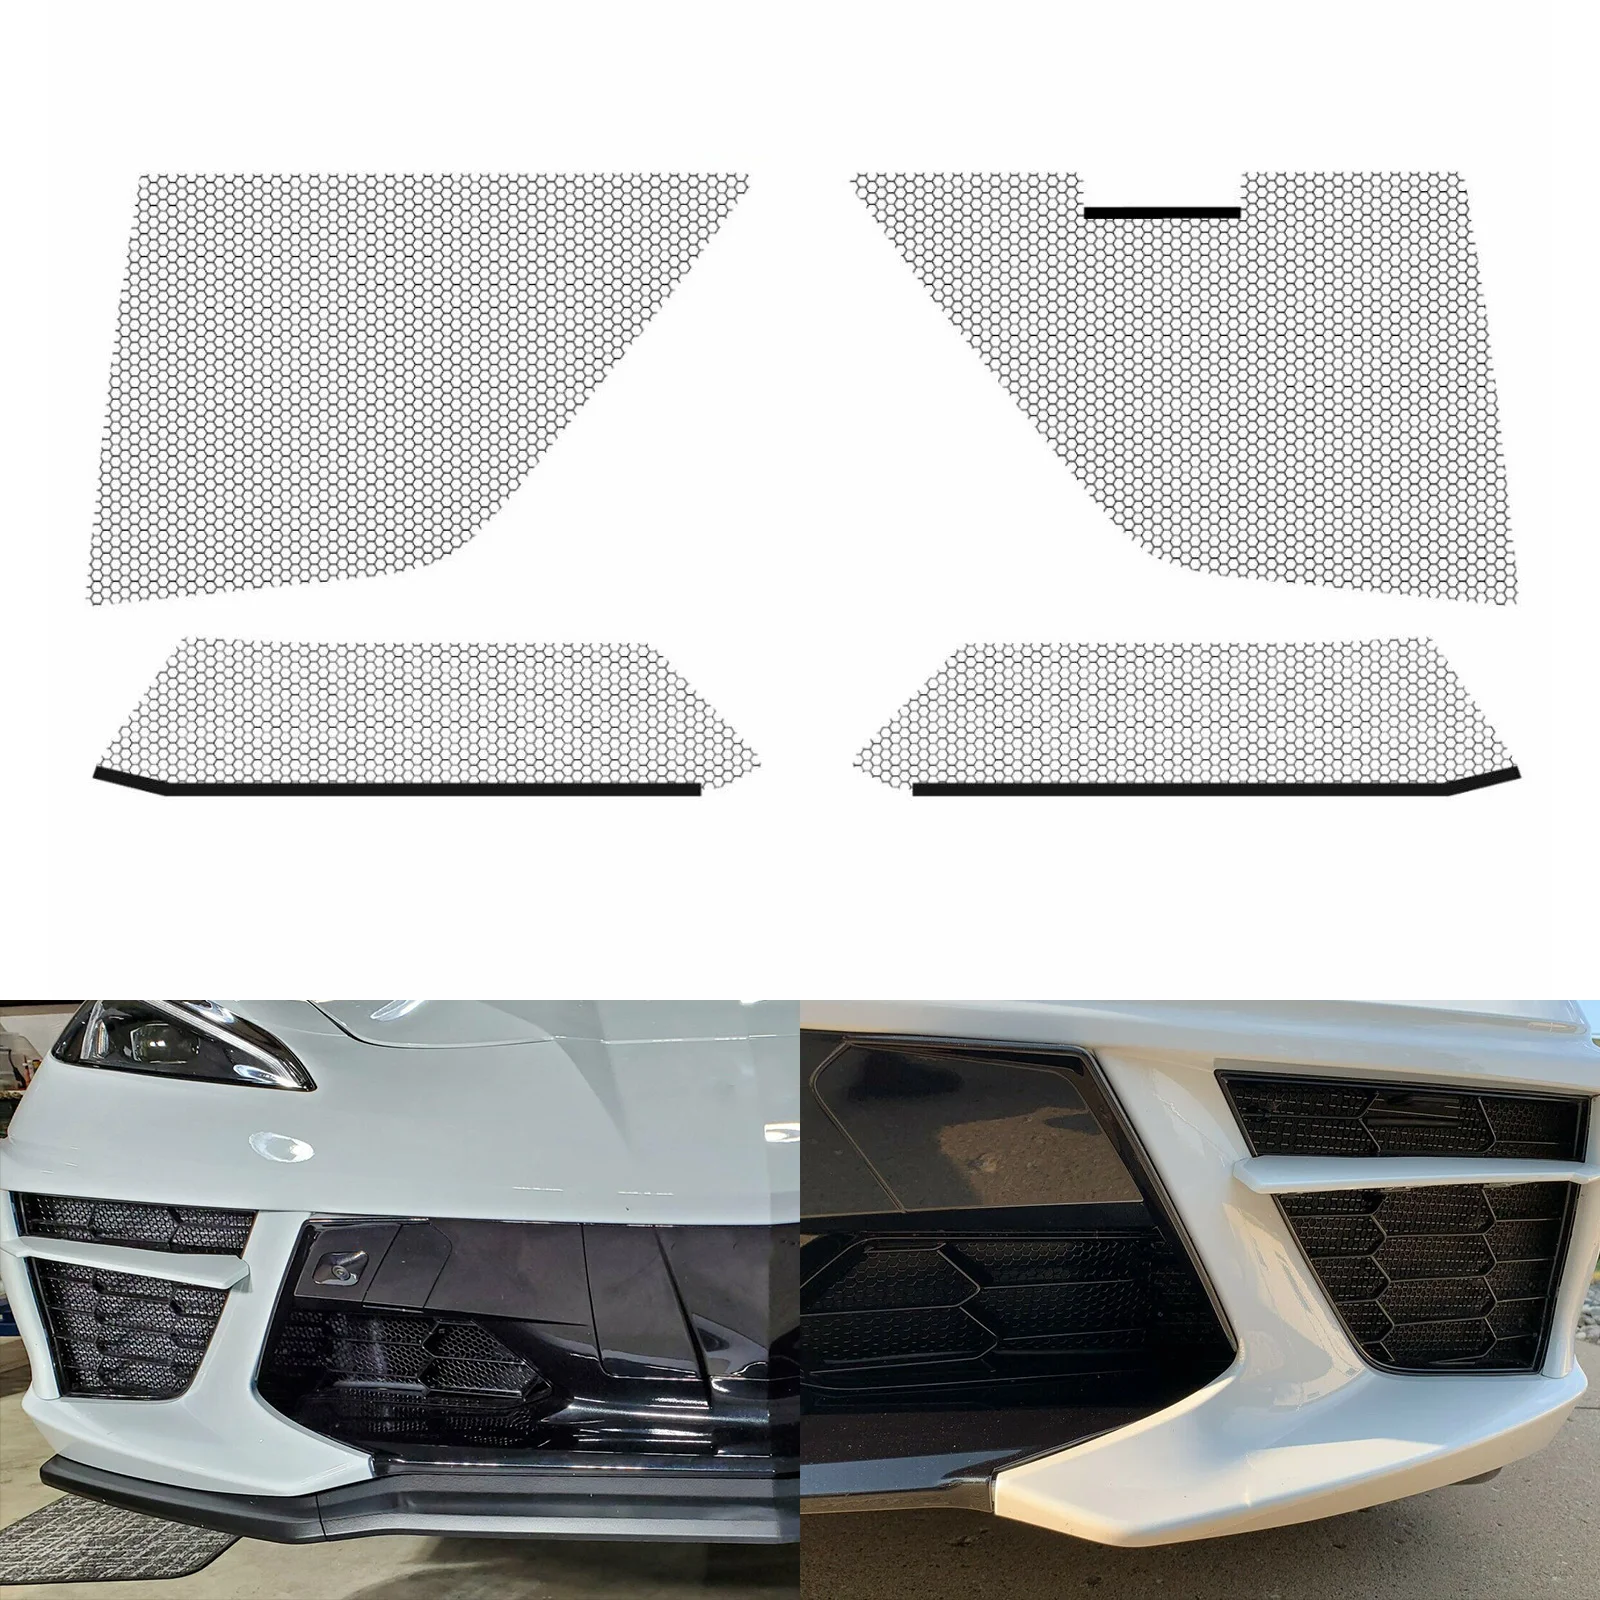 

Car Fog Lamp Grid Mesh Vent Air Intake Grille for Chevy Corvette C8 2020-2022 Replacement Parts